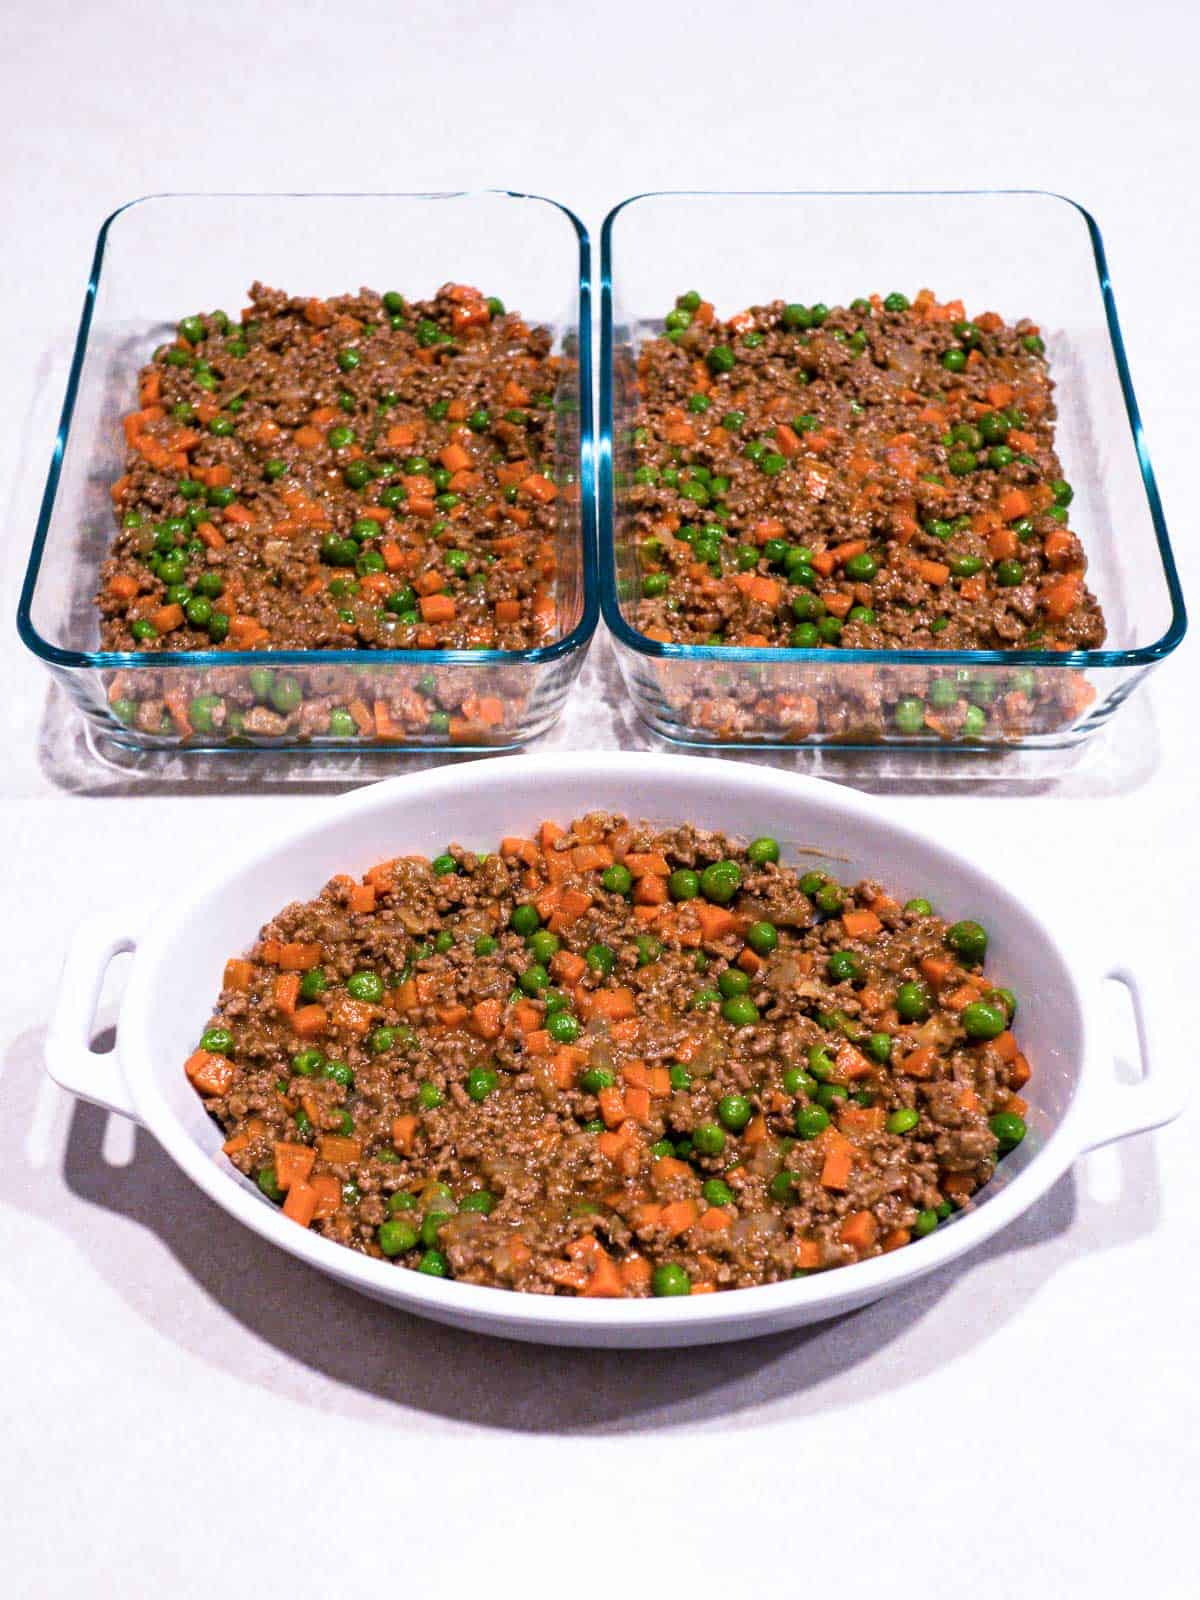 Meat mixture divided among three baking dishes.